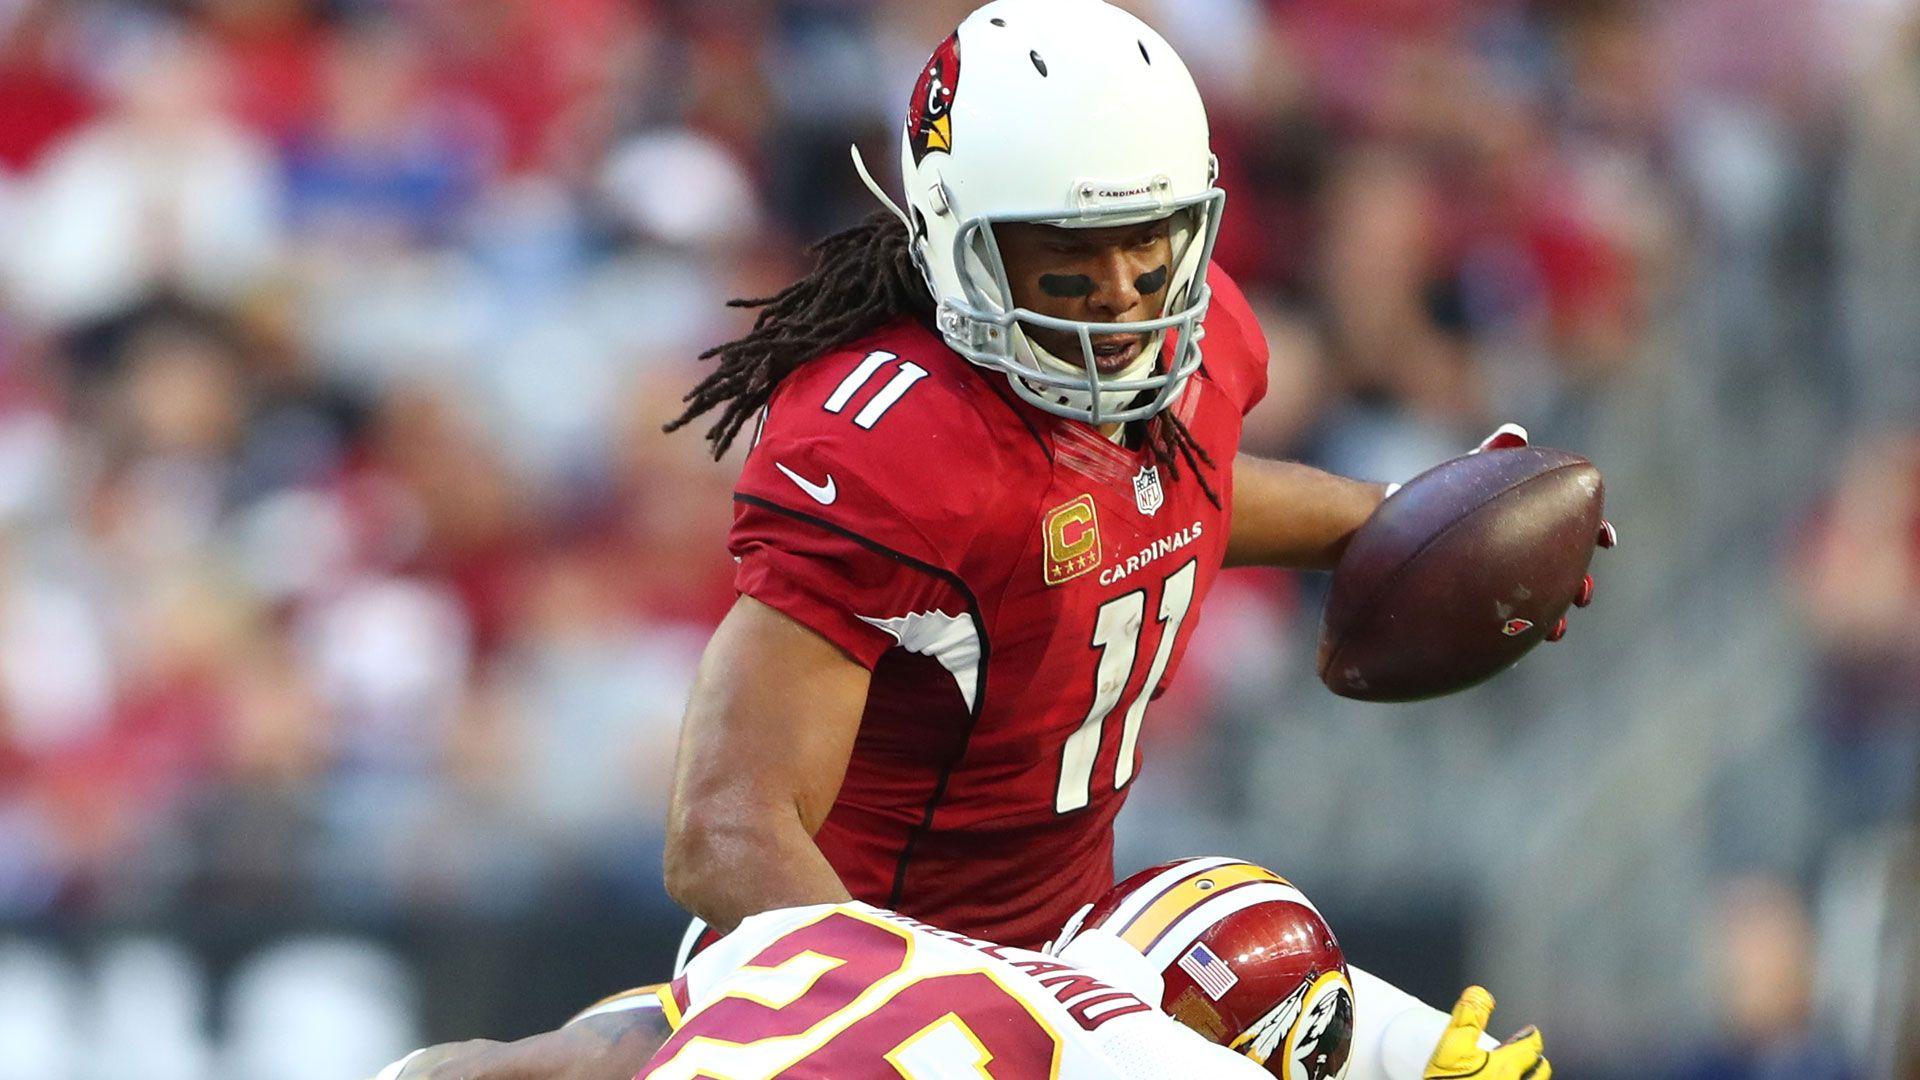 Larry Fitzgerald inches closer to Jerry Rice's receptions record